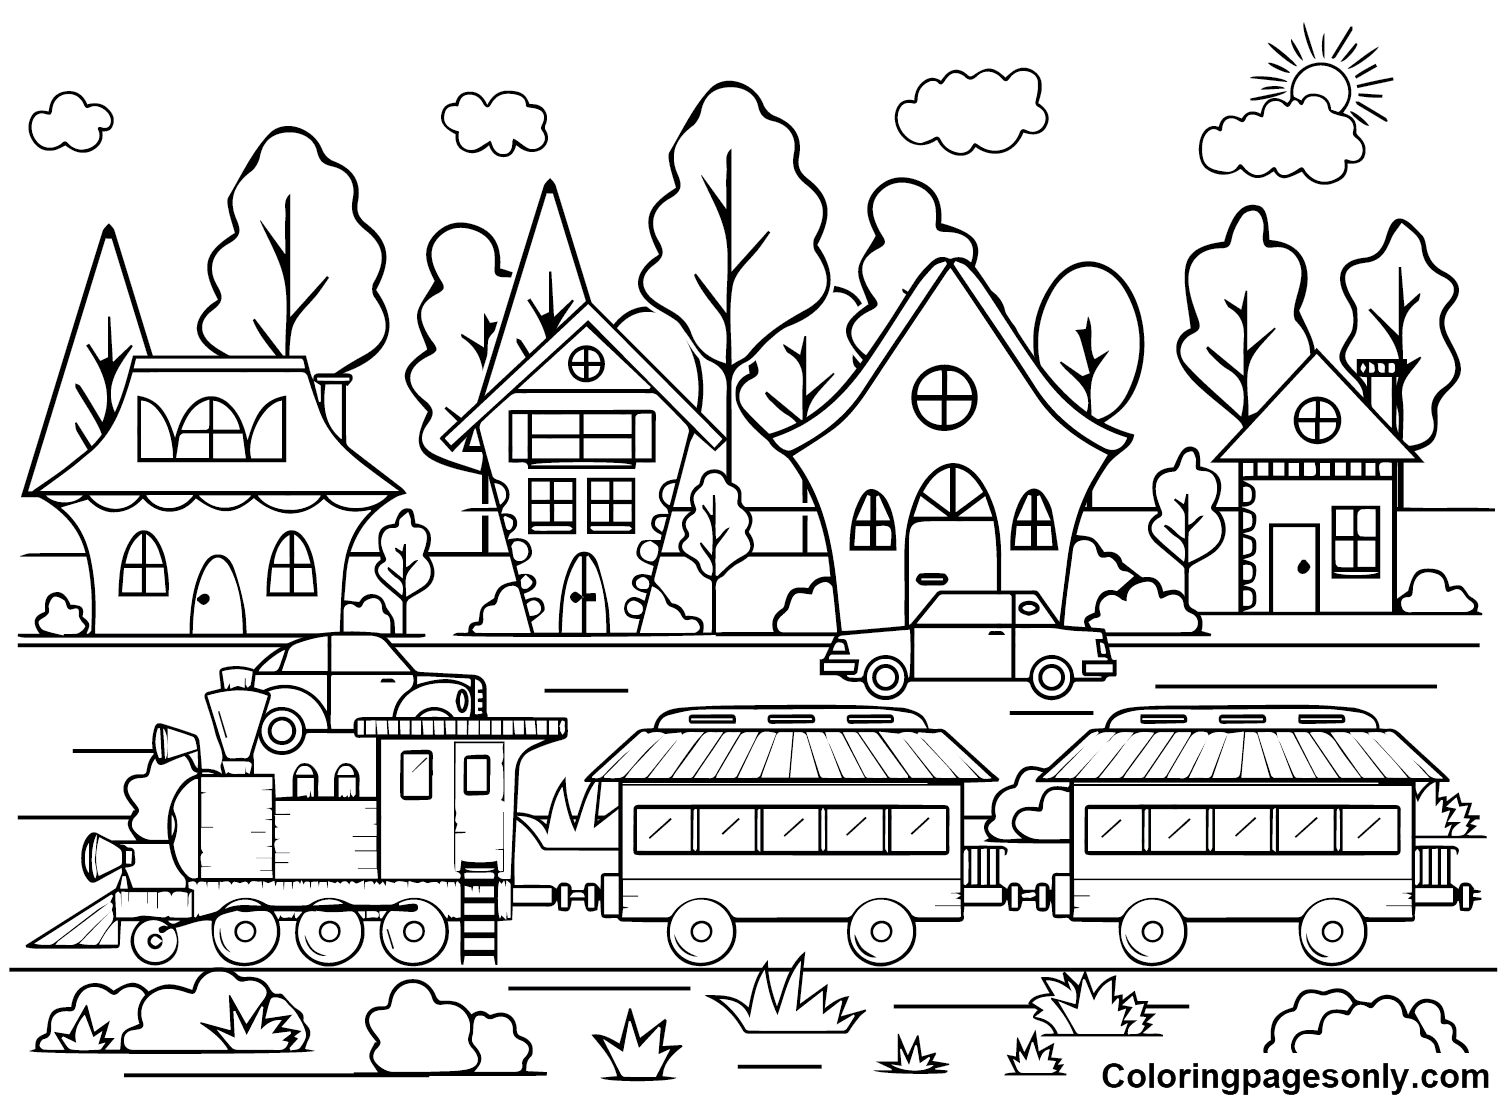 Train color Sheet Coloring Pages